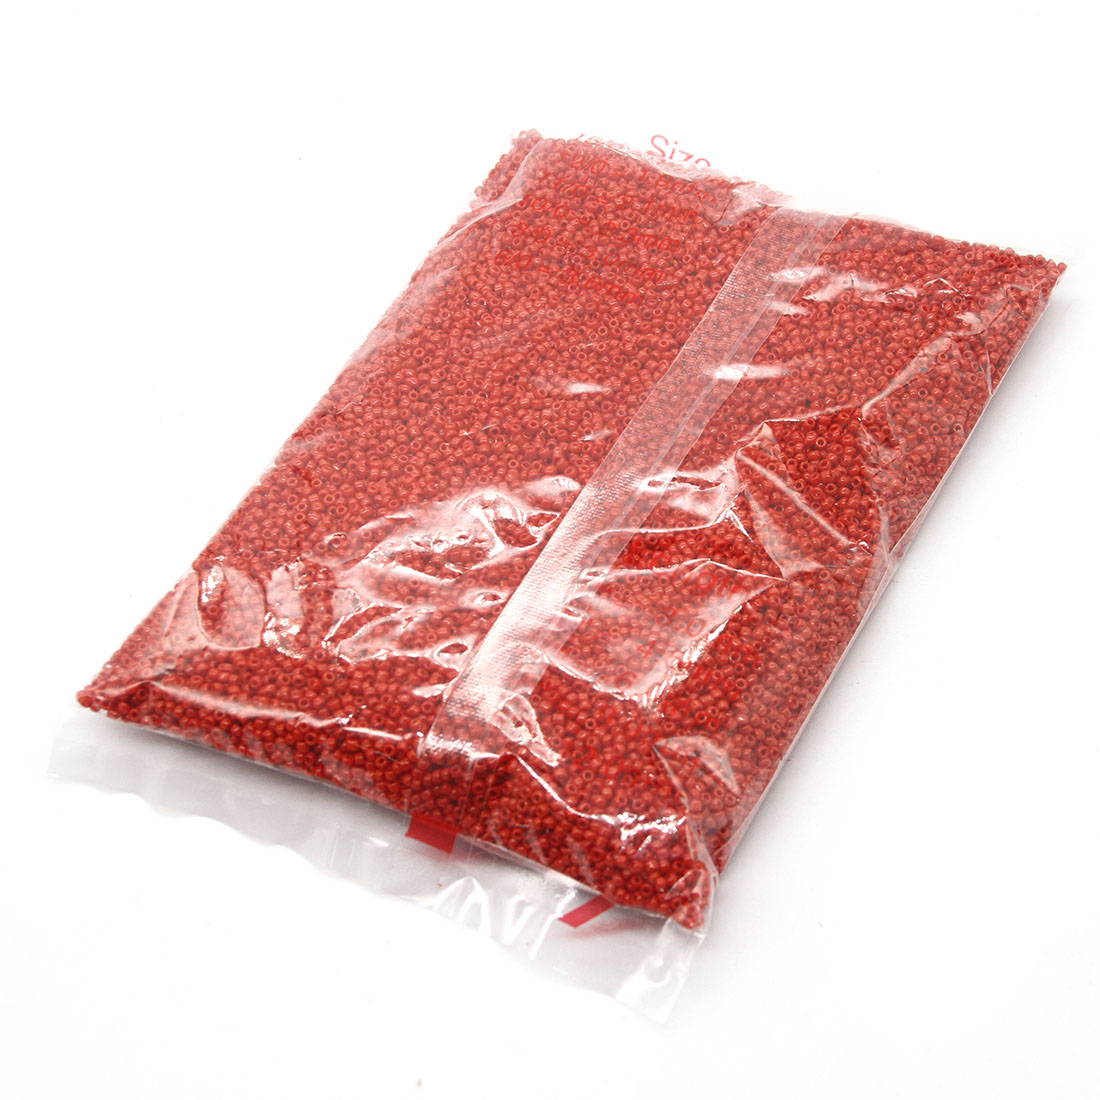 Red blood 3mm 10,000 packs